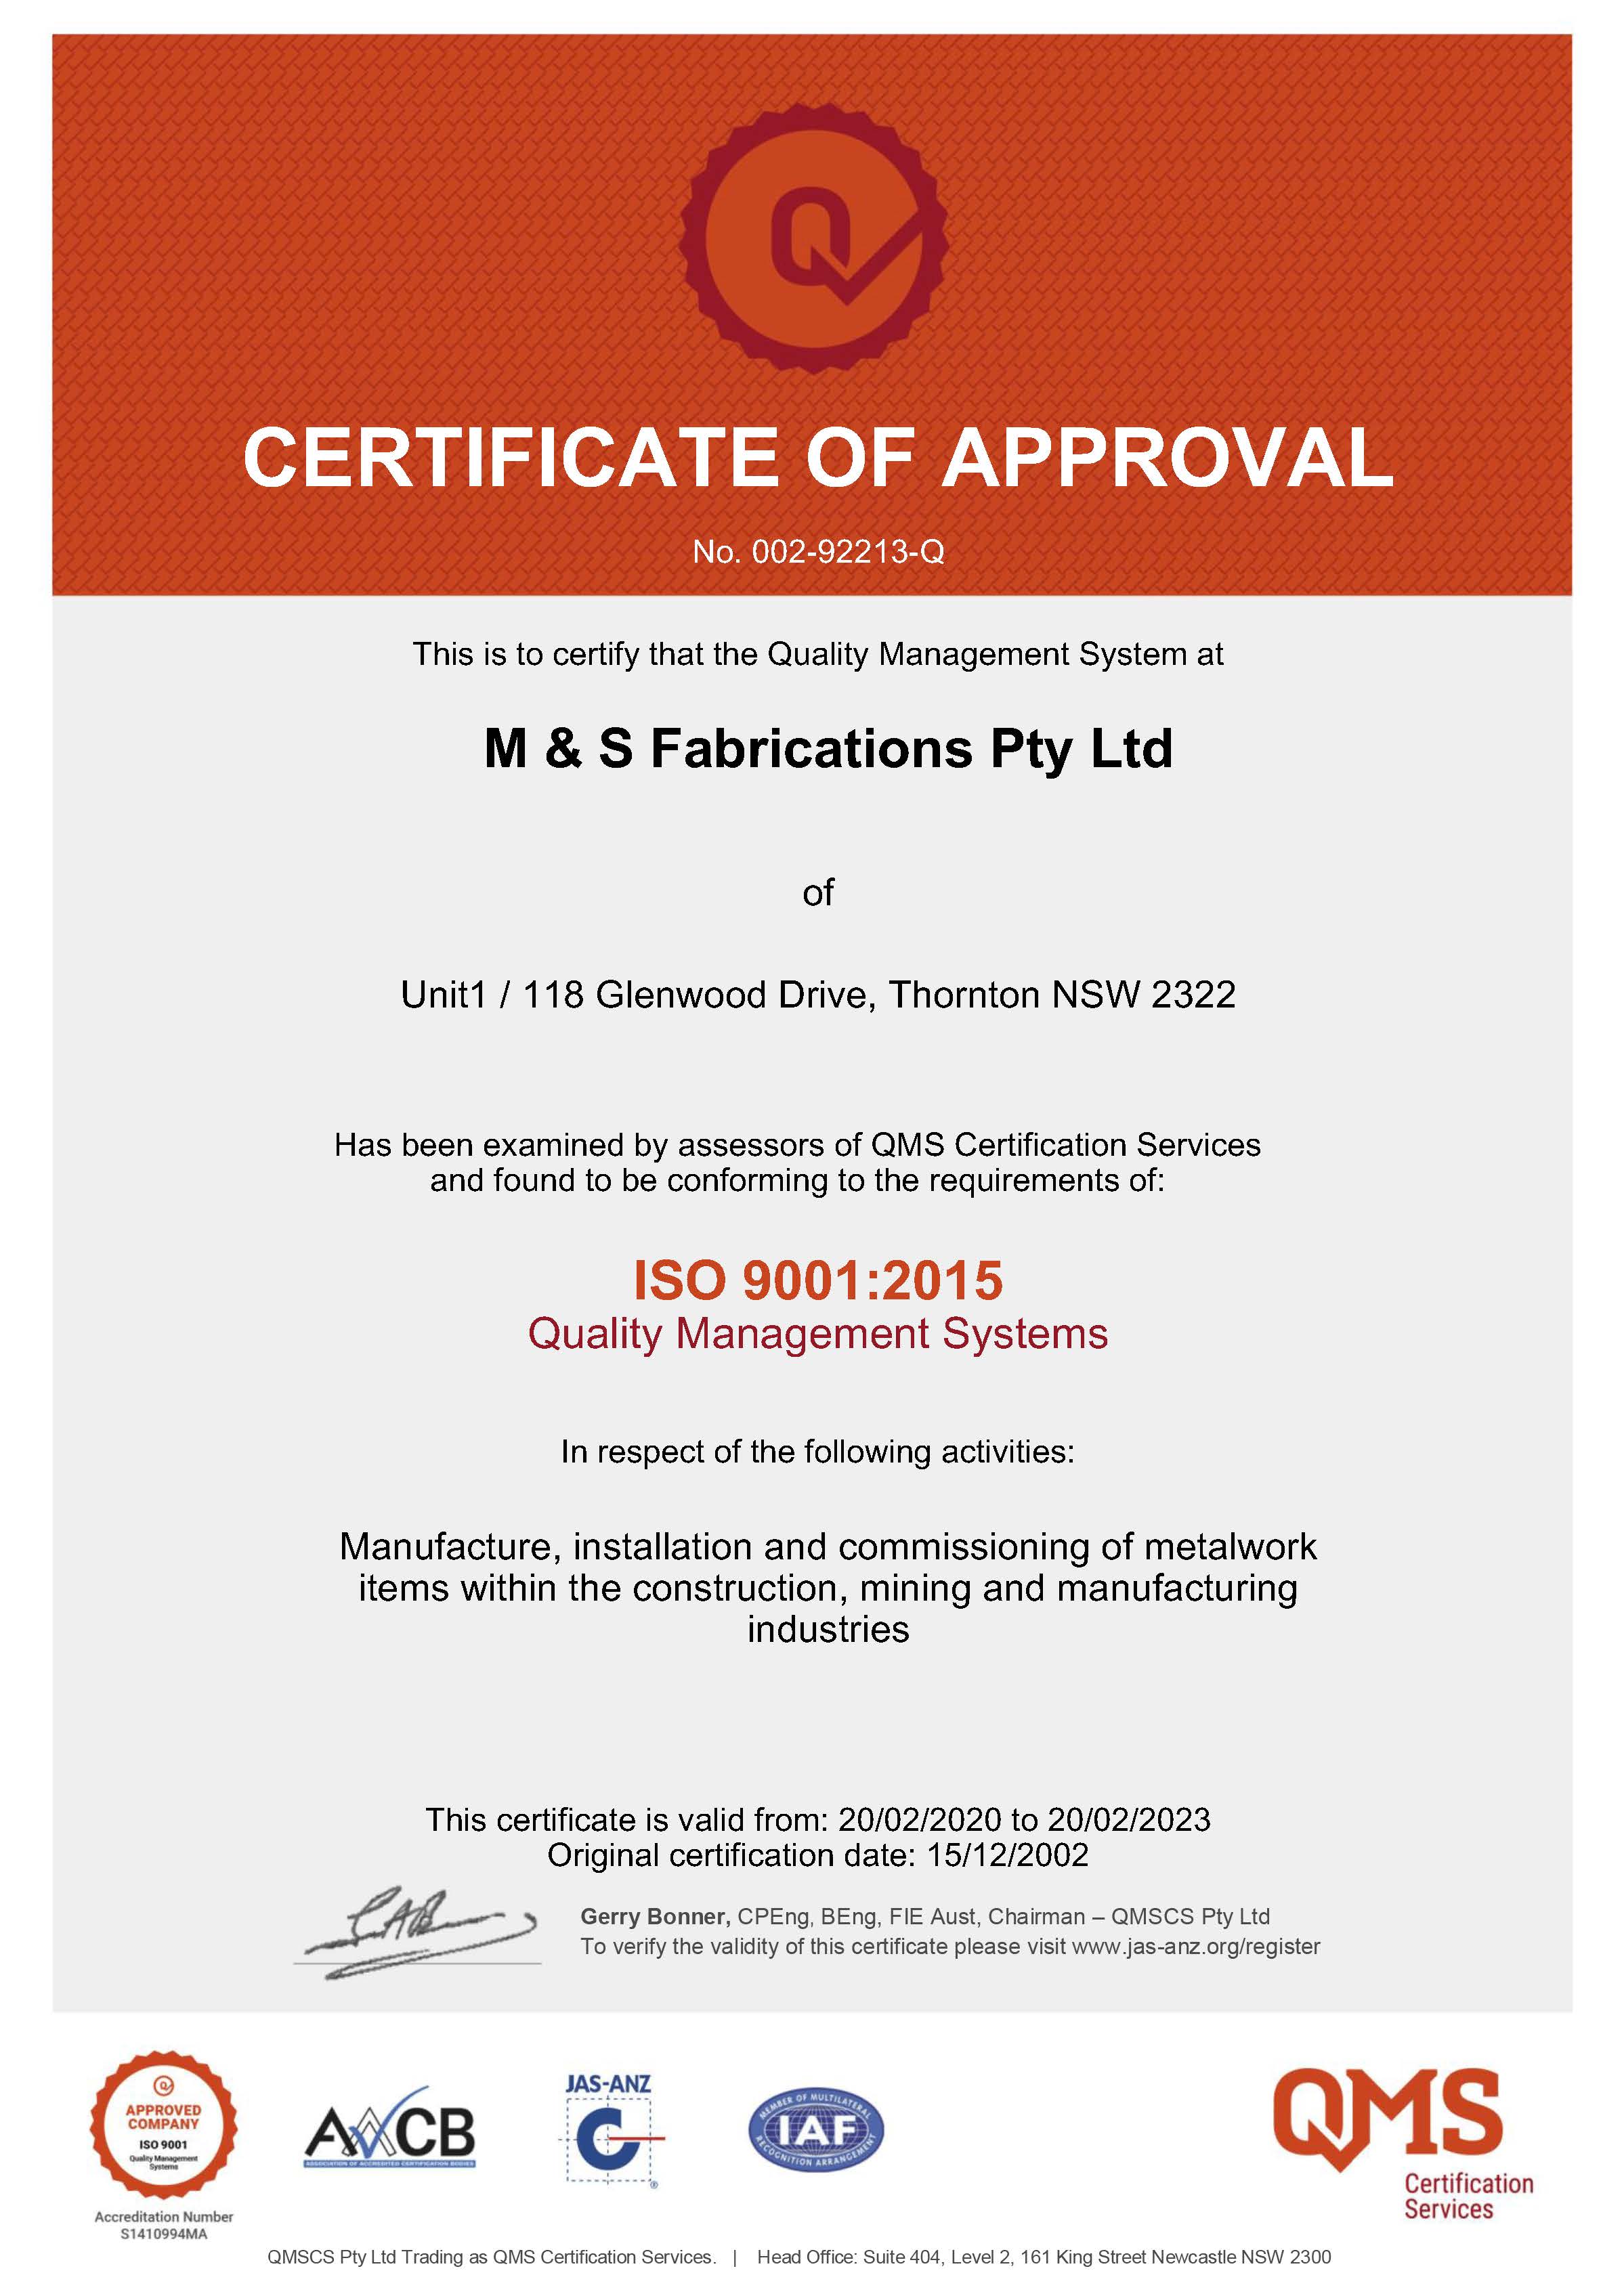 MSF ISO 9001 QMS 2015 expires 20.02.2023